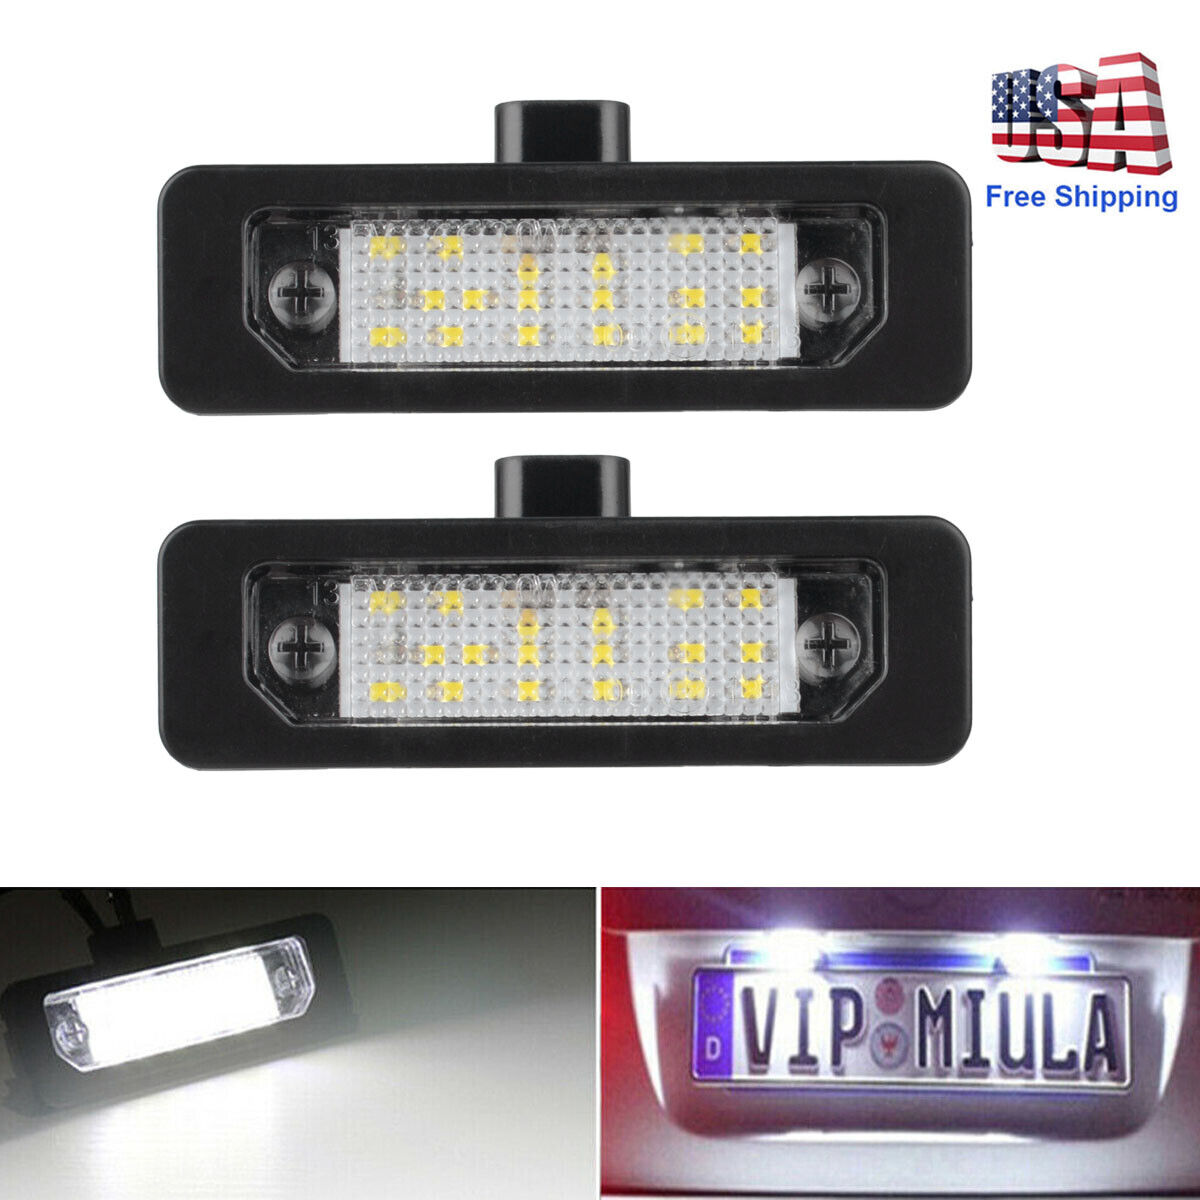 2X LED Number License Plate Tag Light For Ford Flex Taurus Focus Fusion Mustang